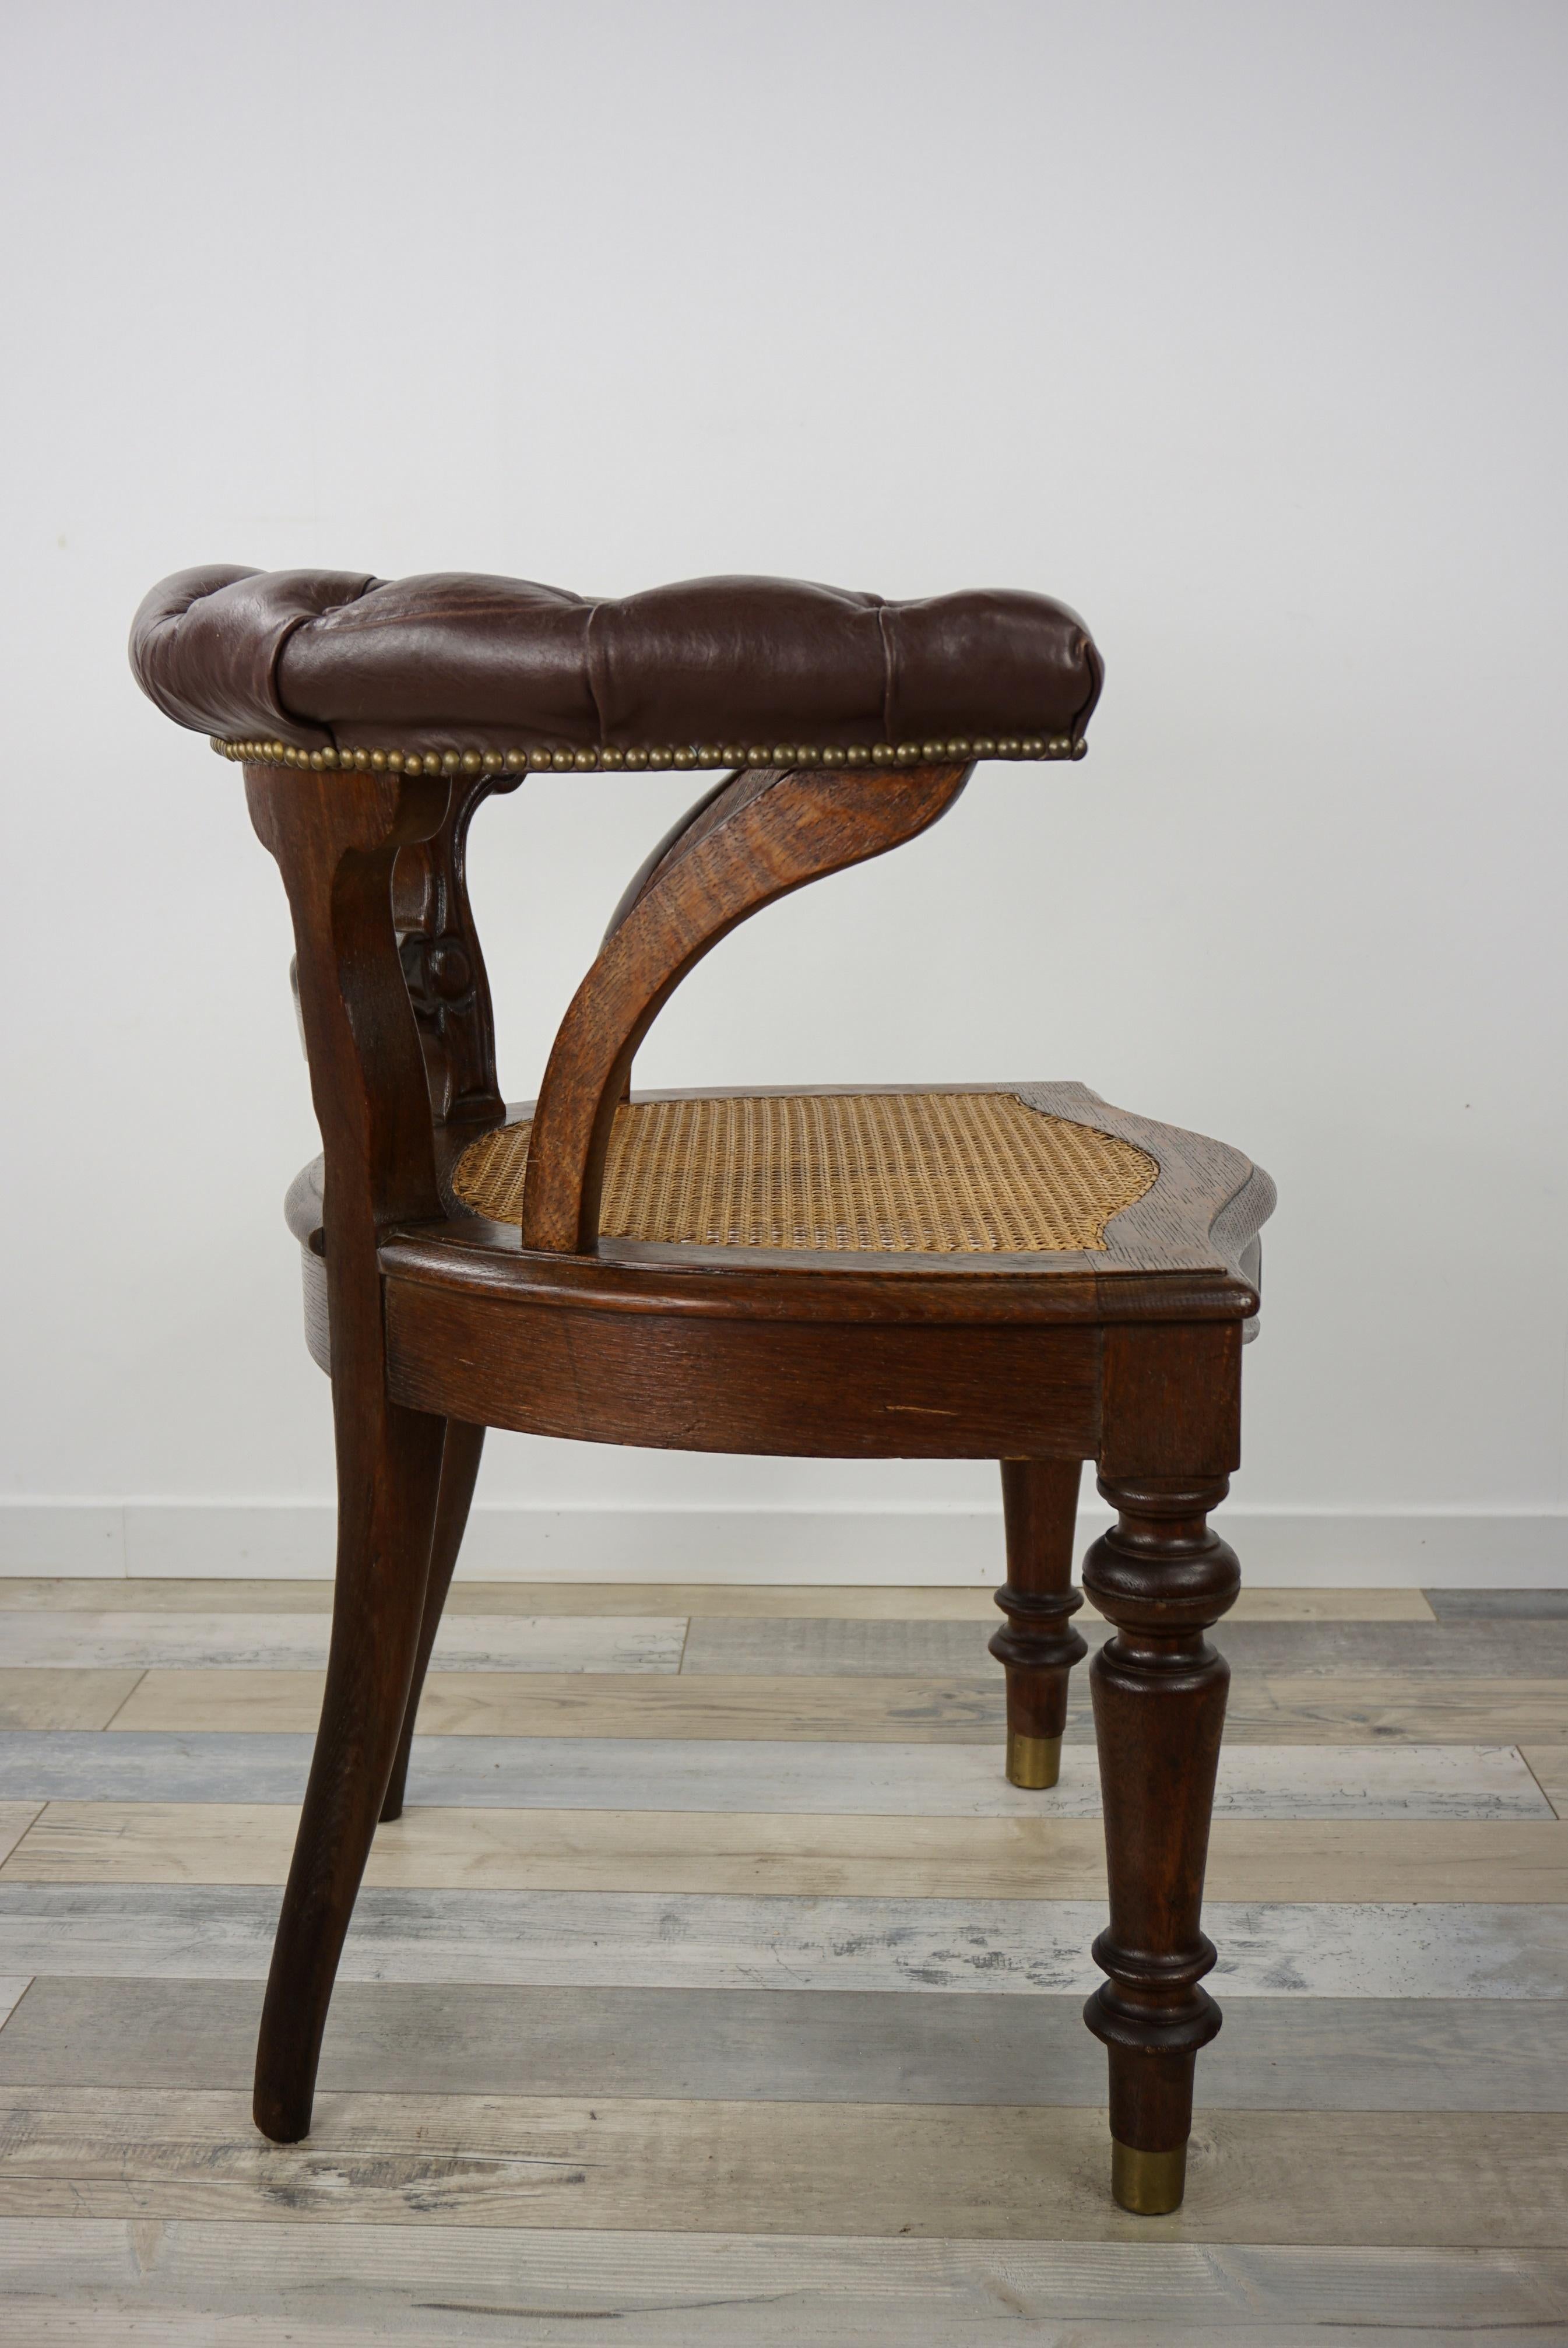 Leather and Wicker Cane 19th Century William IV Design Antique Desk Chair 12